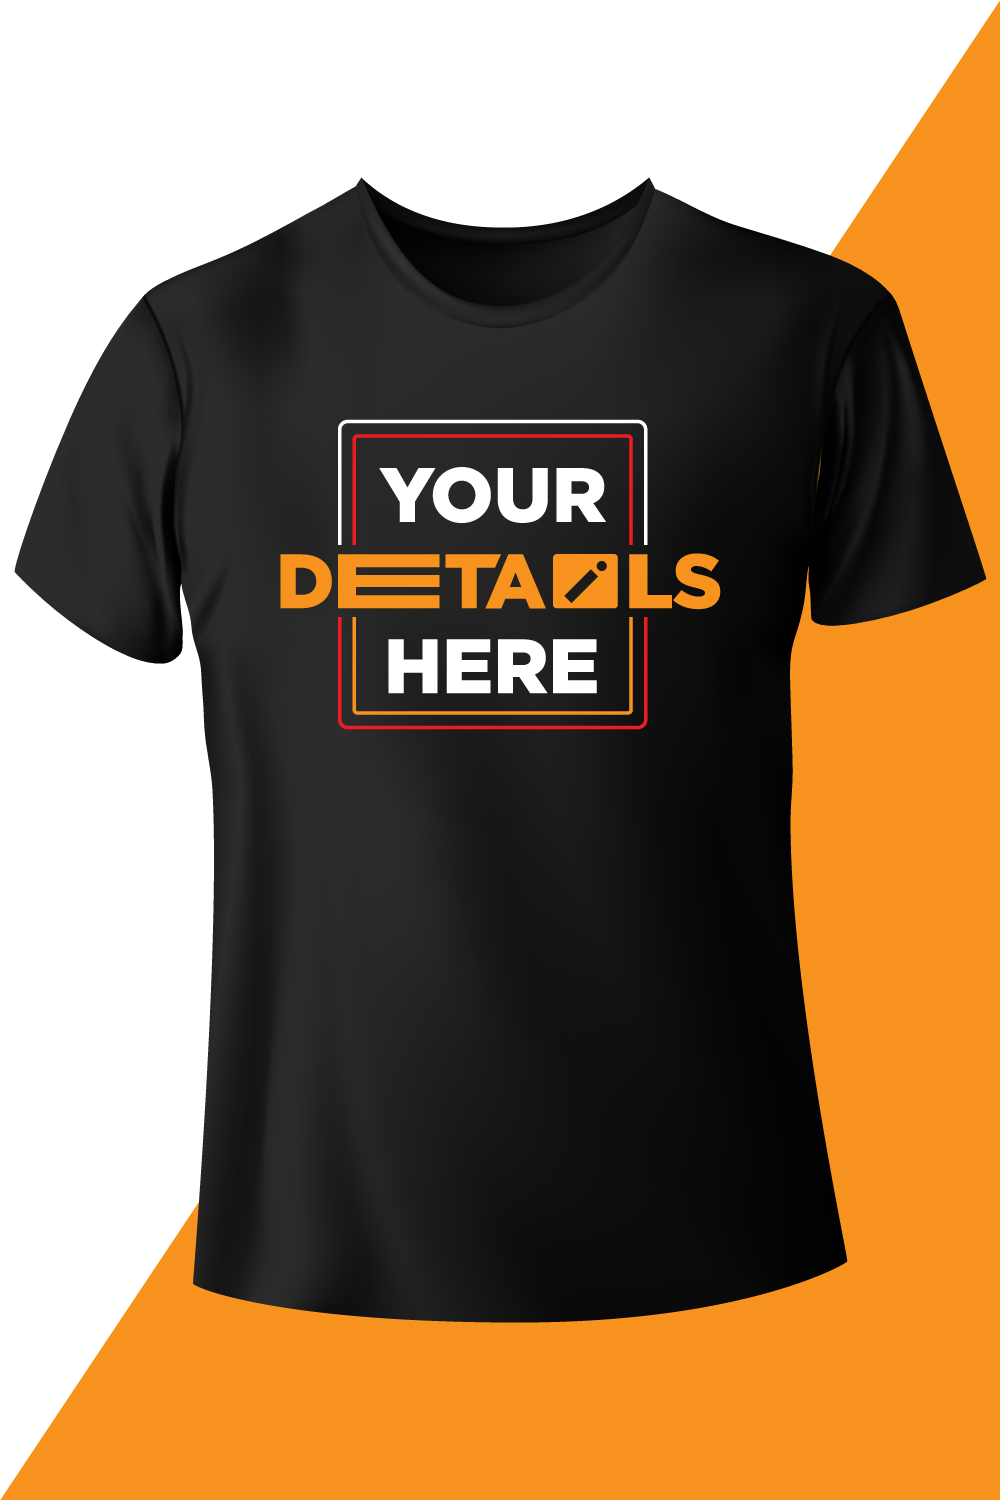 Image of a black t-shirt with an exquisite inscription Your Details Here.